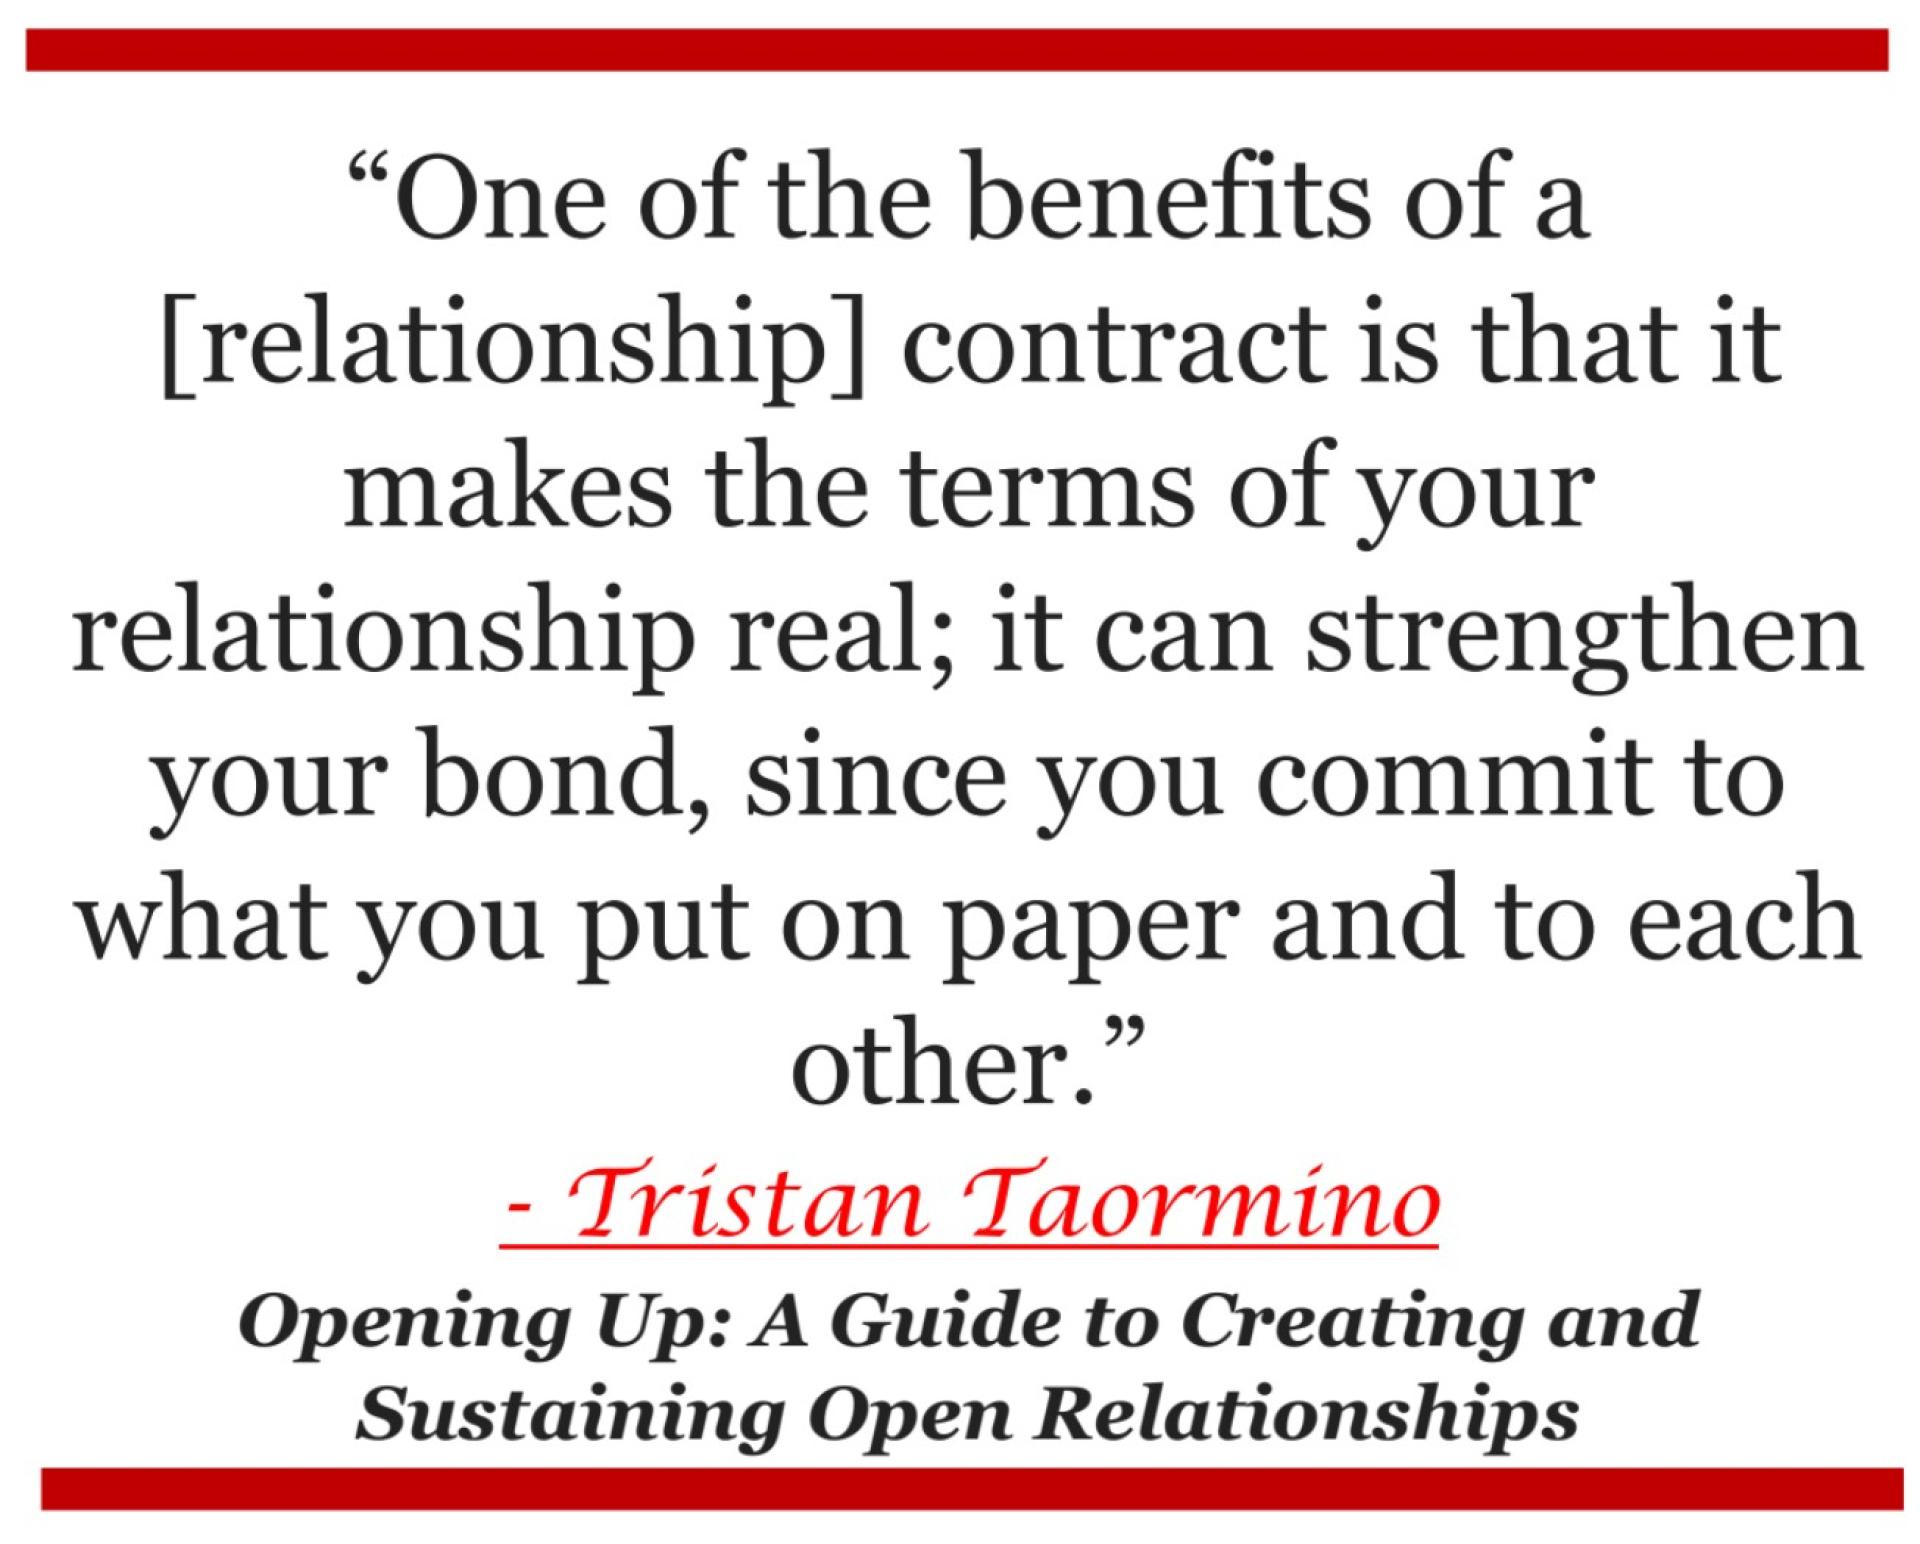 Tristan Taormino relationship contract quote